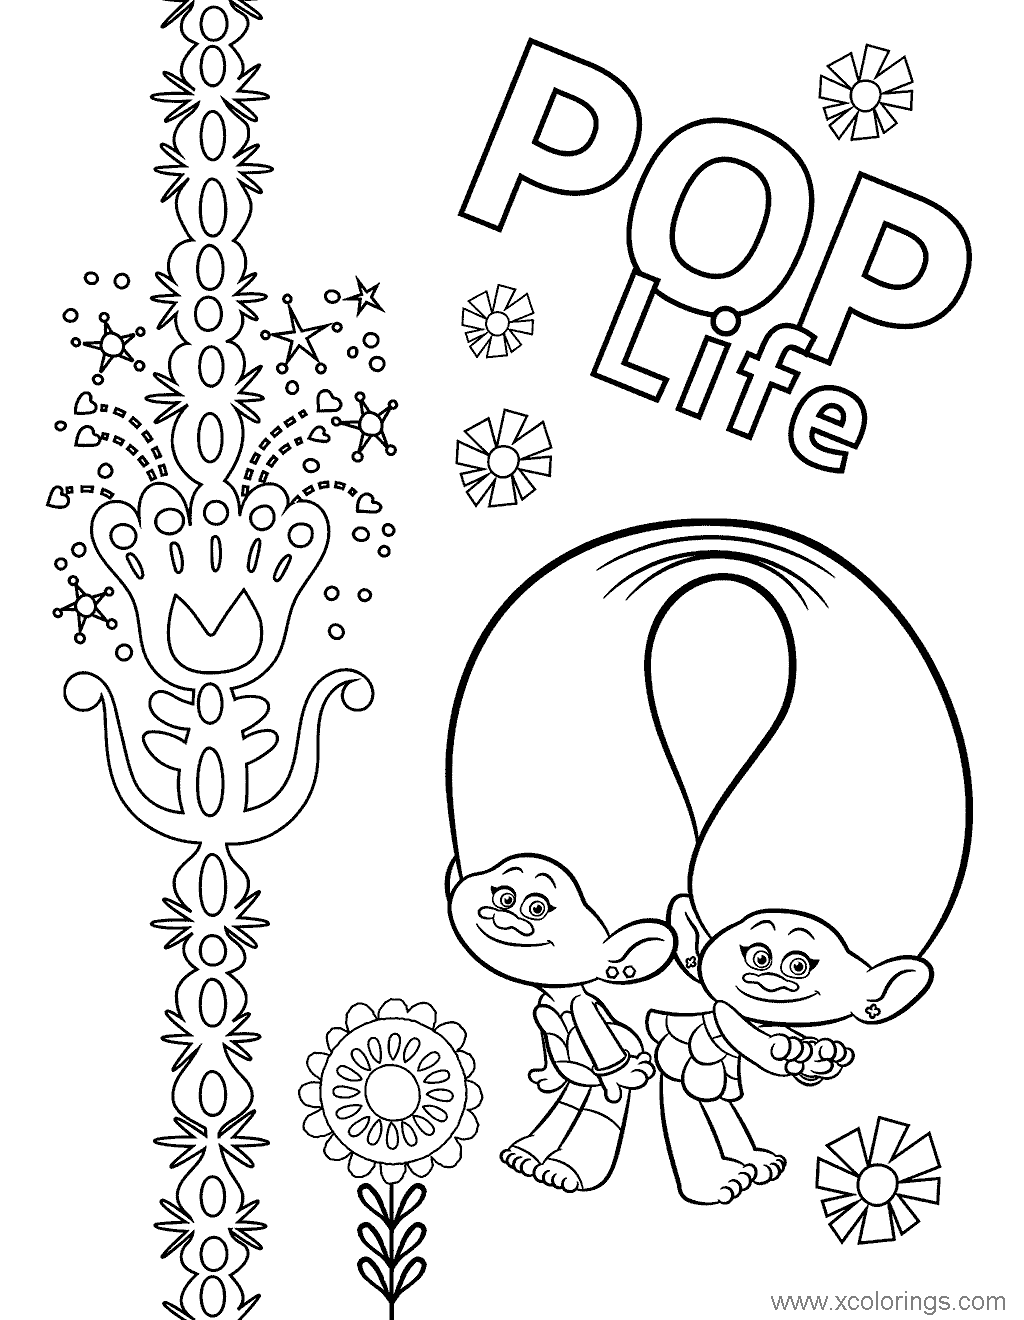 Free Trolls World Tour Poppy and Branch Coloring Pages printable